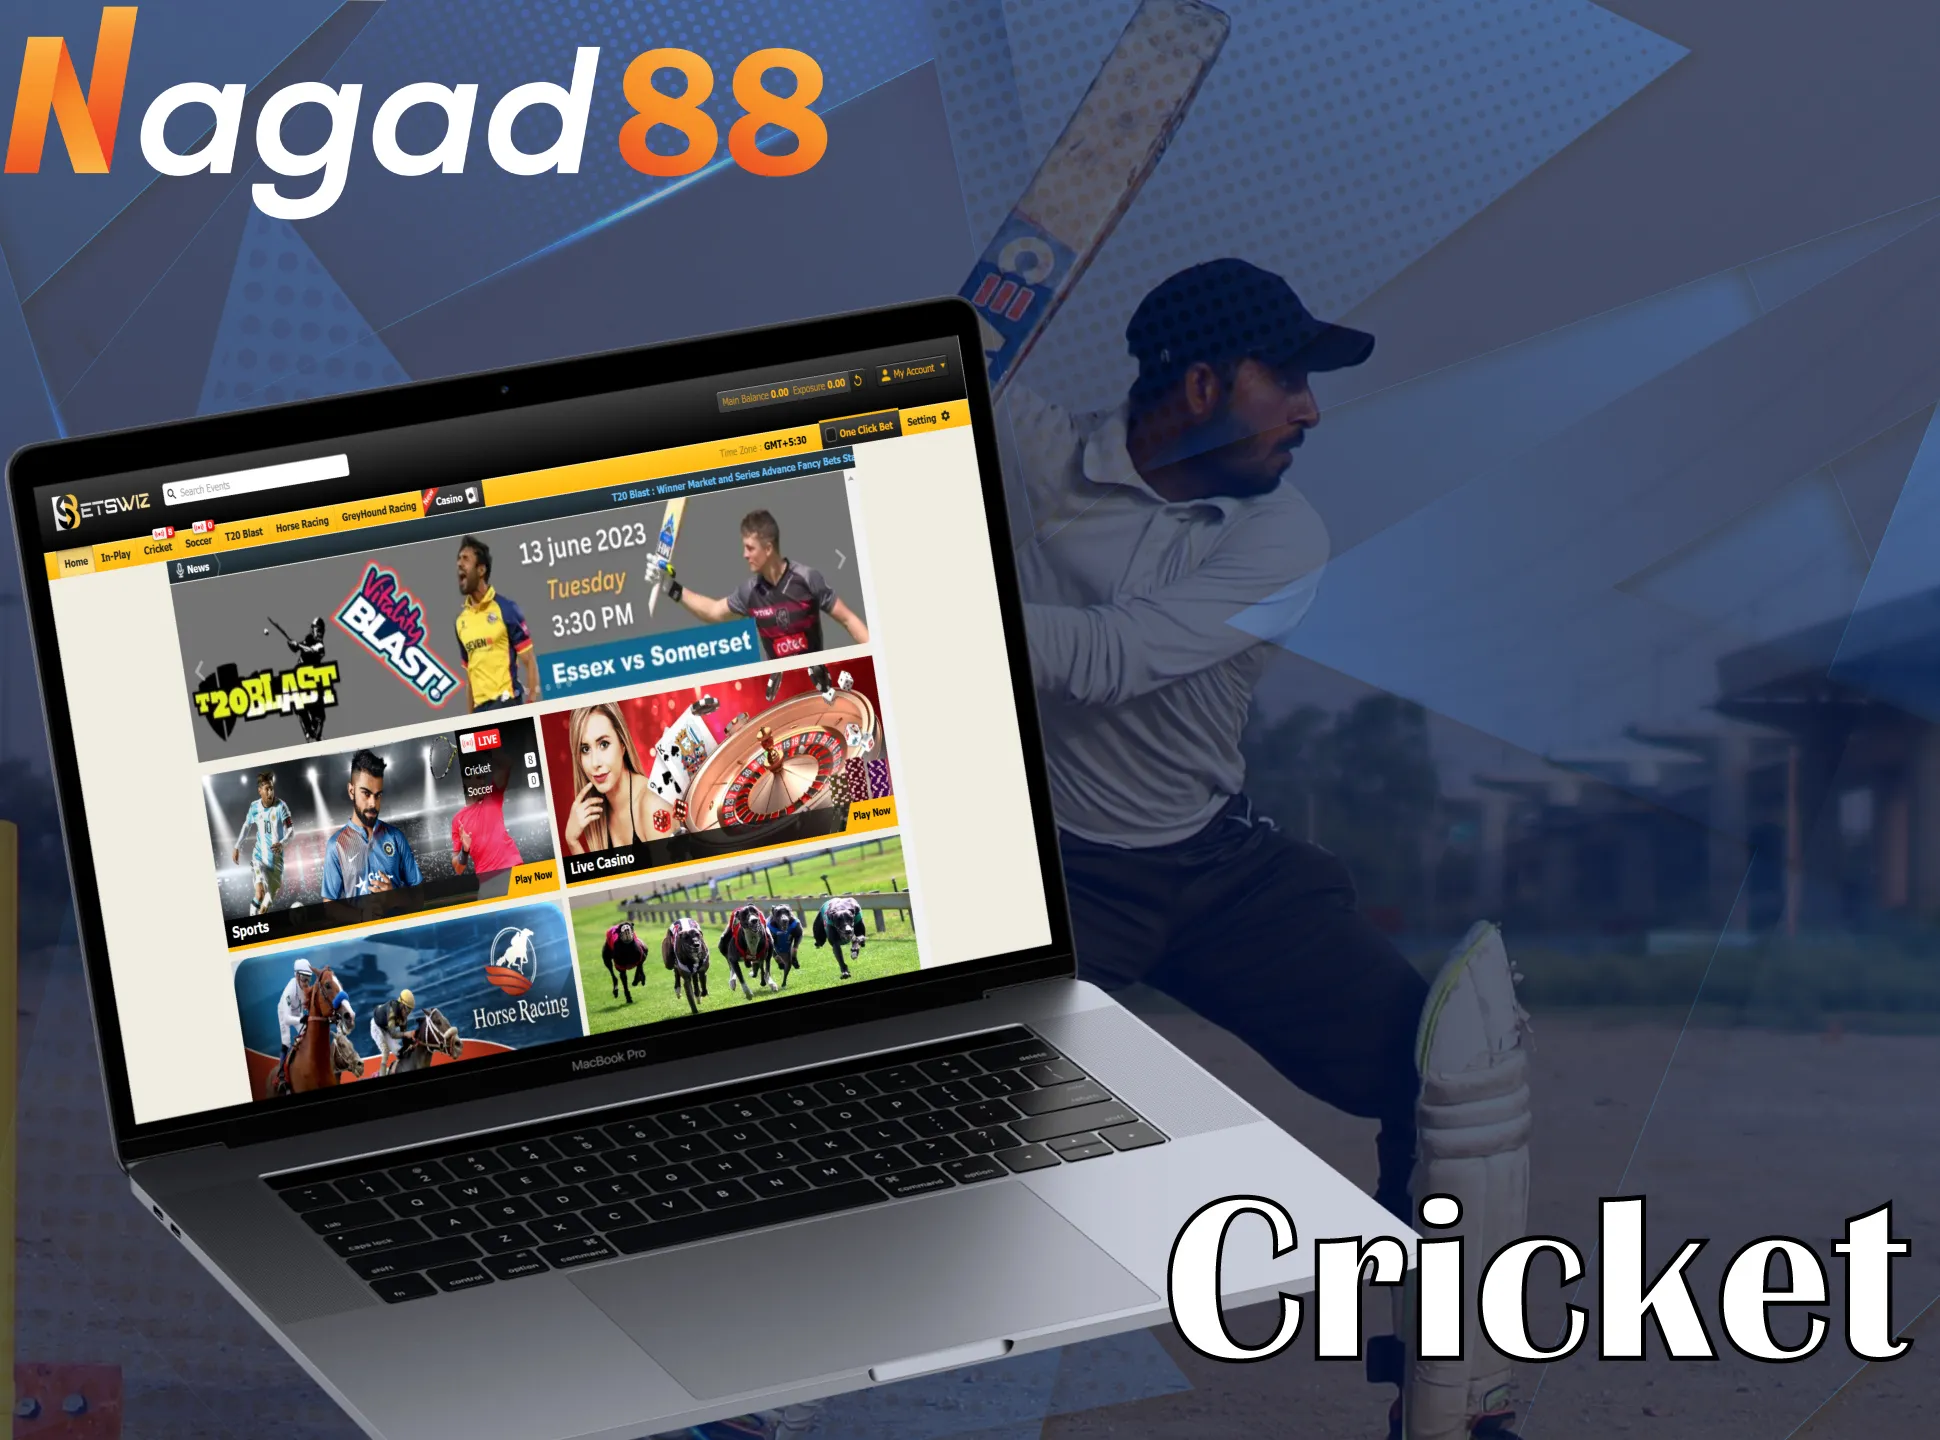 At Nagad88, place your cricket bets.